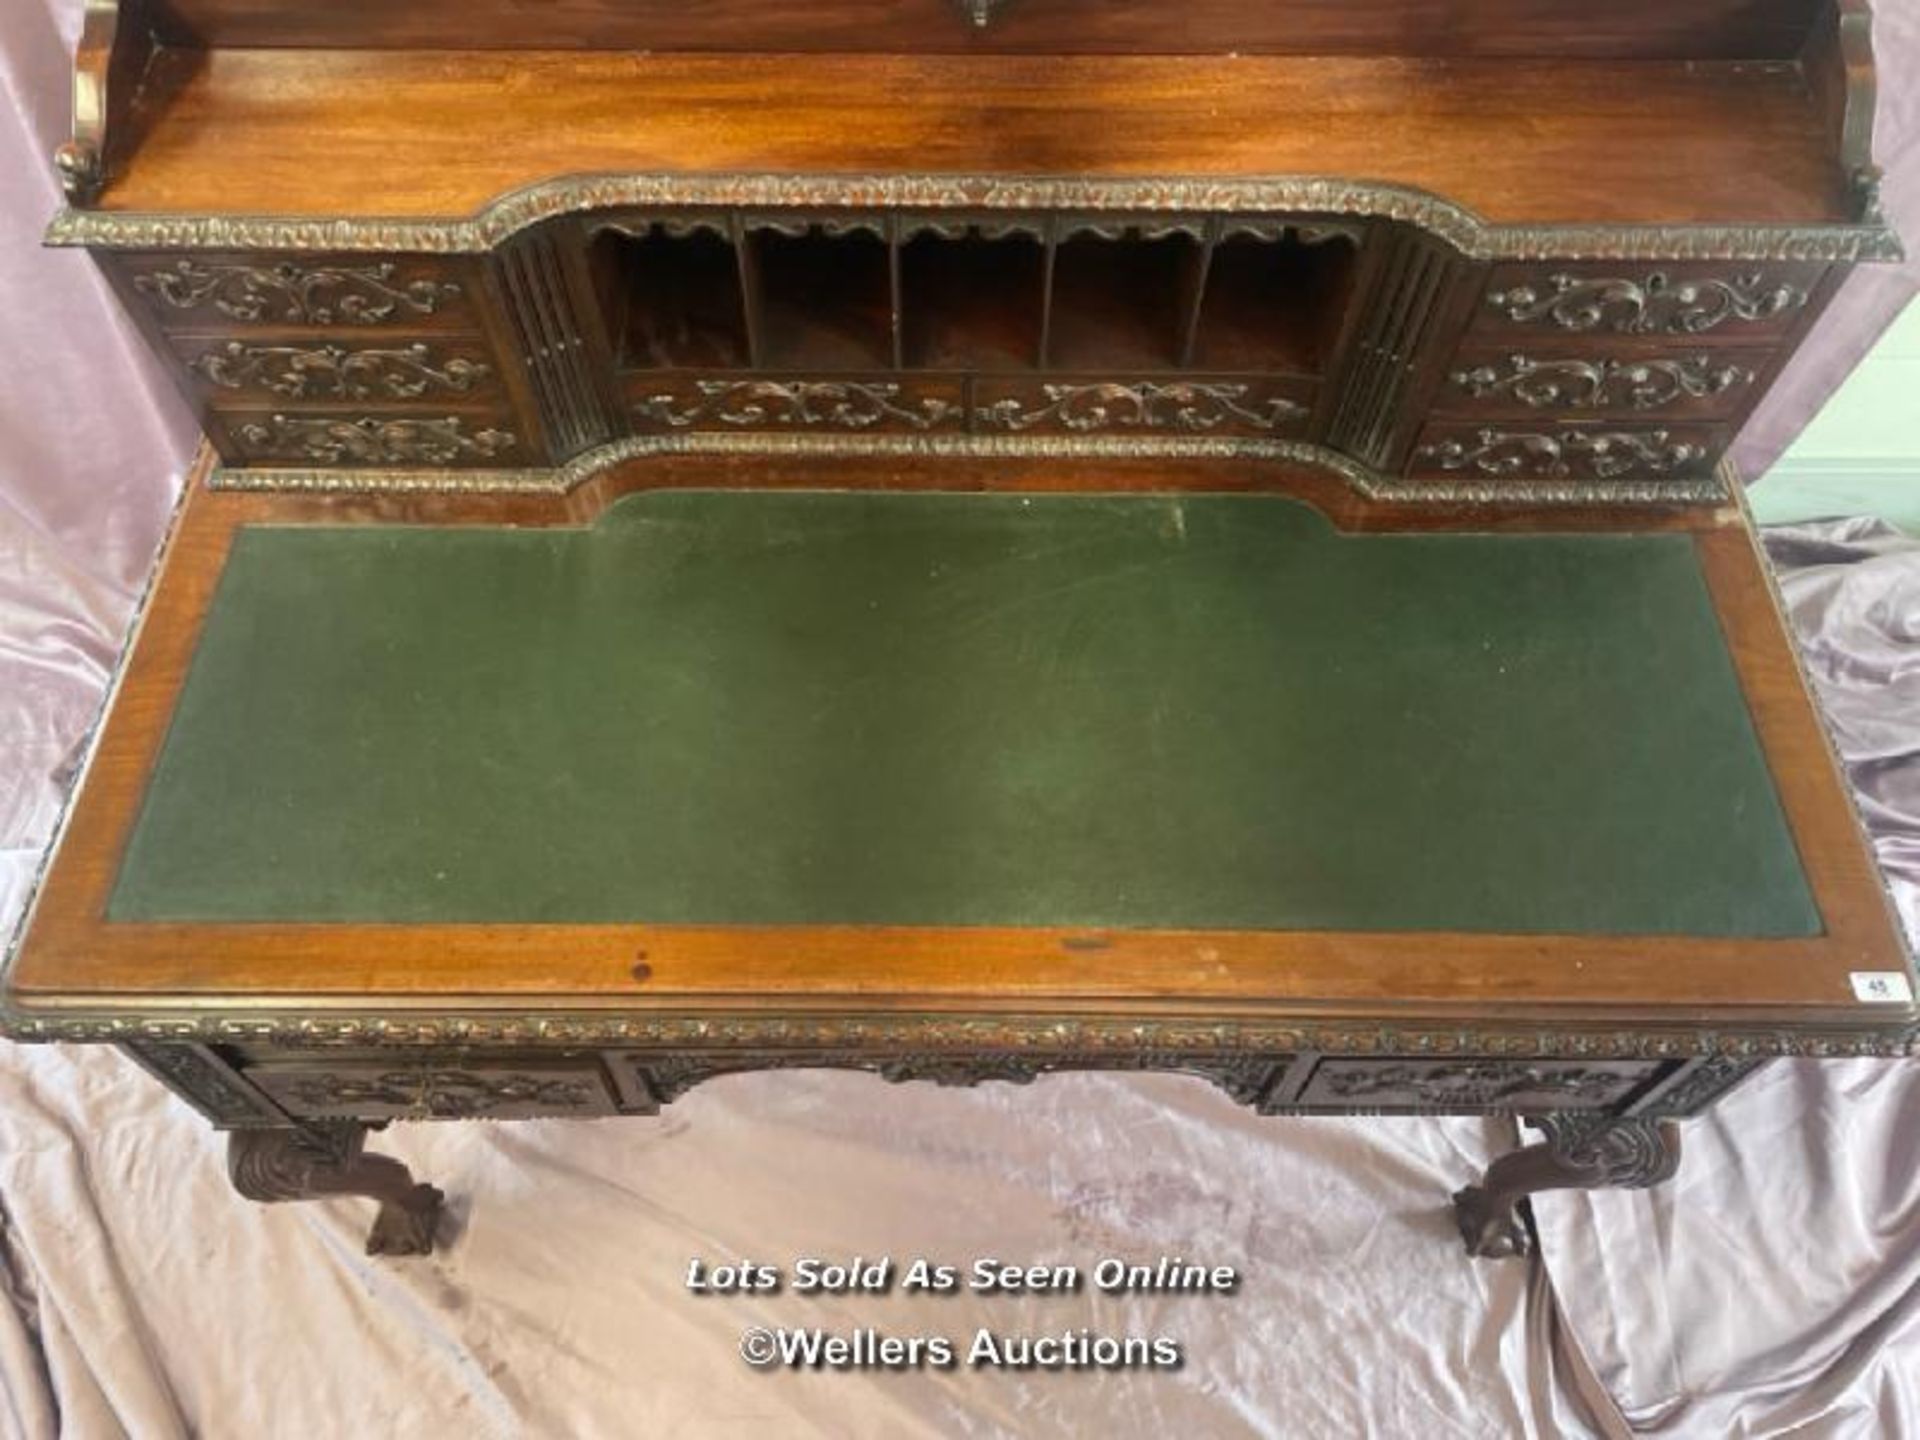 CIRCA 1900, GEOGIAN STYLE HIGHLY DECORATIVE AND CARVED MAHOGANY LINED WRITING DESK WITH LEATHER - Image 6 of 11